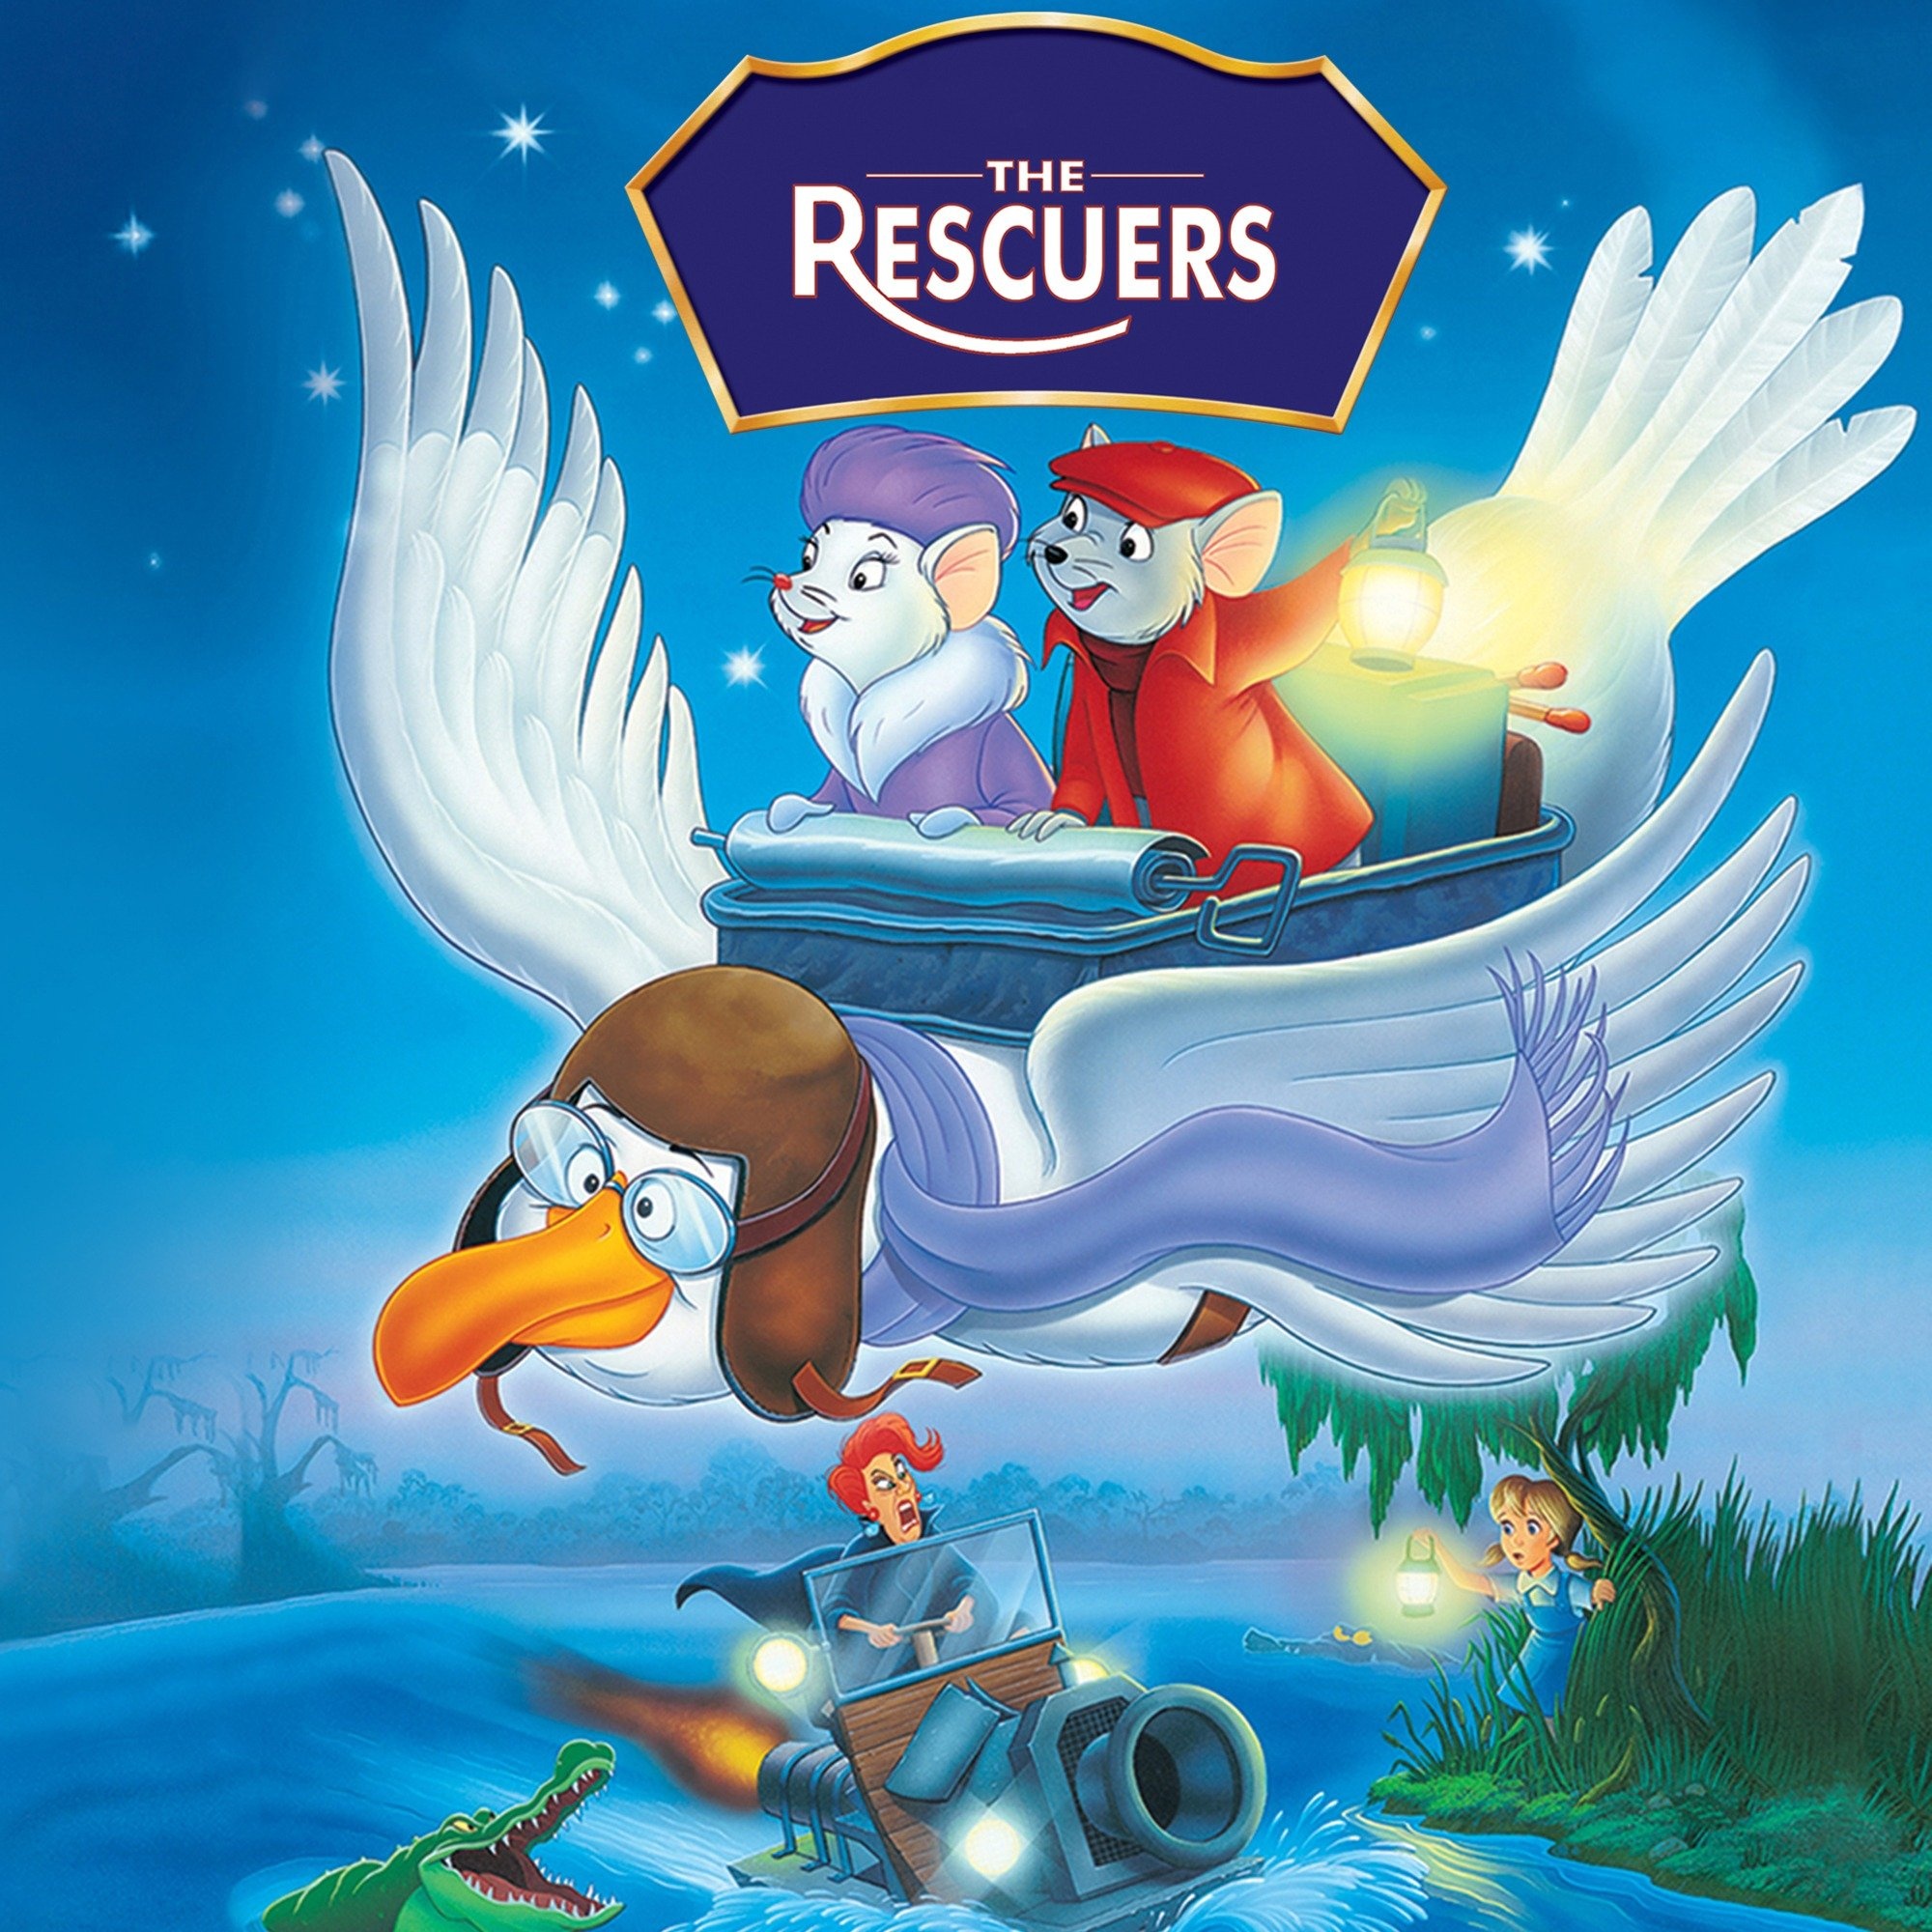 The Rescuers, Full movie online, Plex streaming, Exciting adventure, 2000x2000 HD Handy